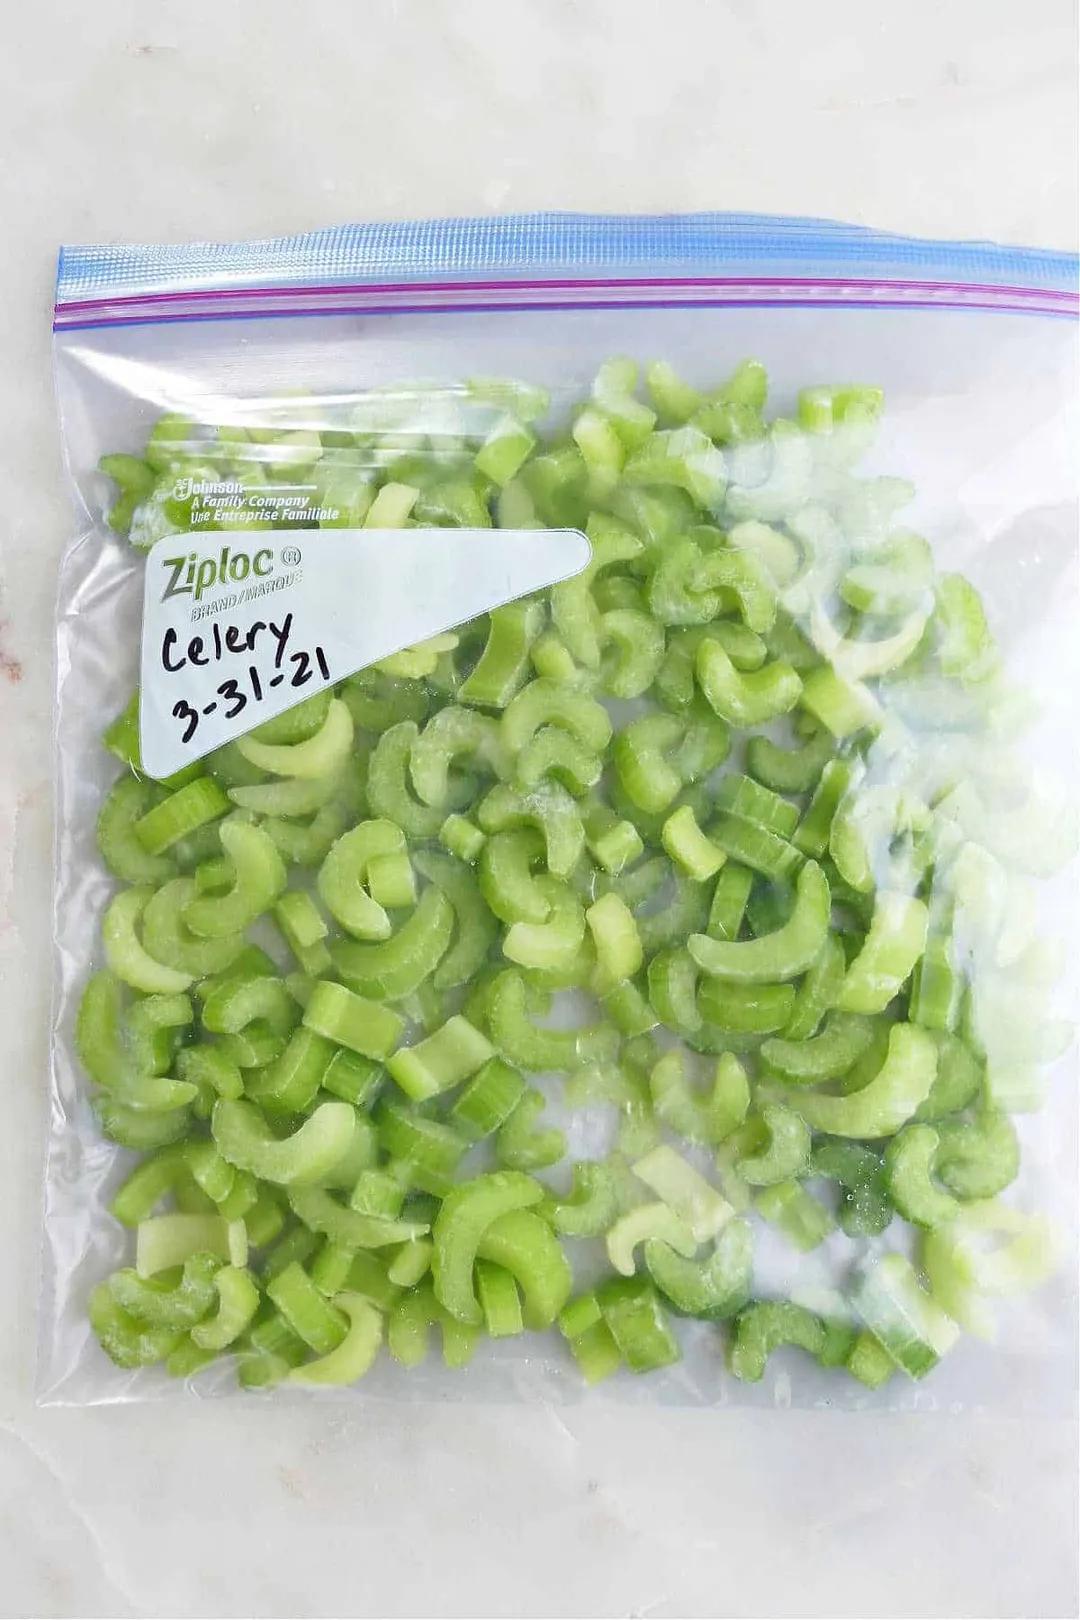 Freezing celery in a bag